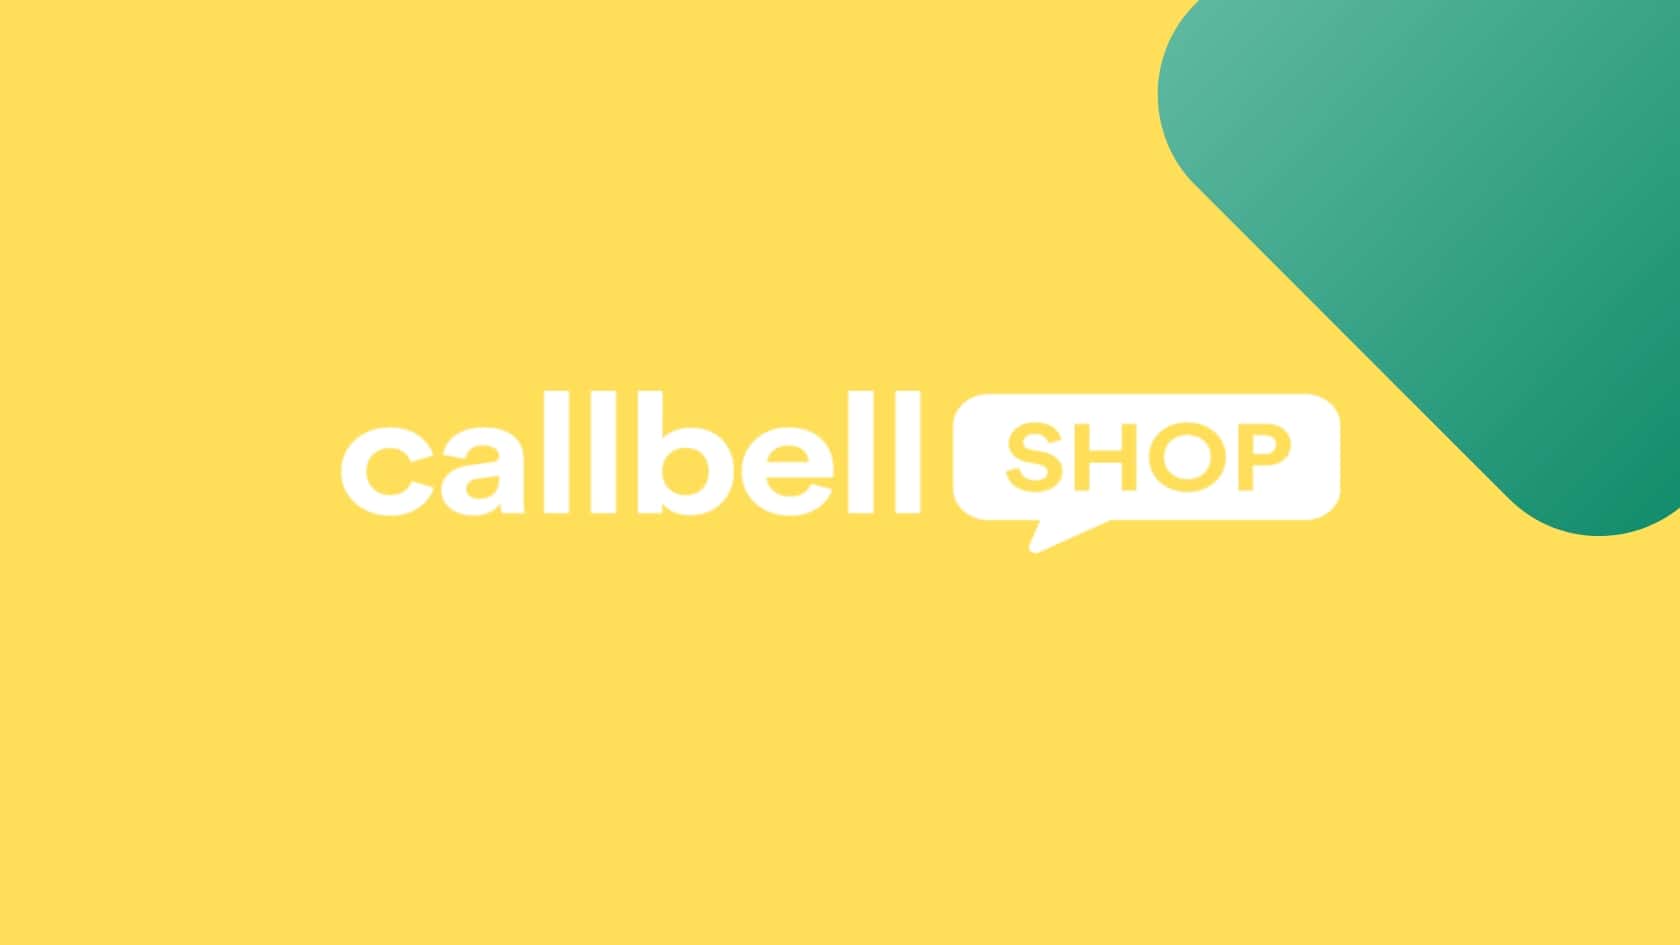 Optimize your e-commerce purchasing process through Callbell Shop